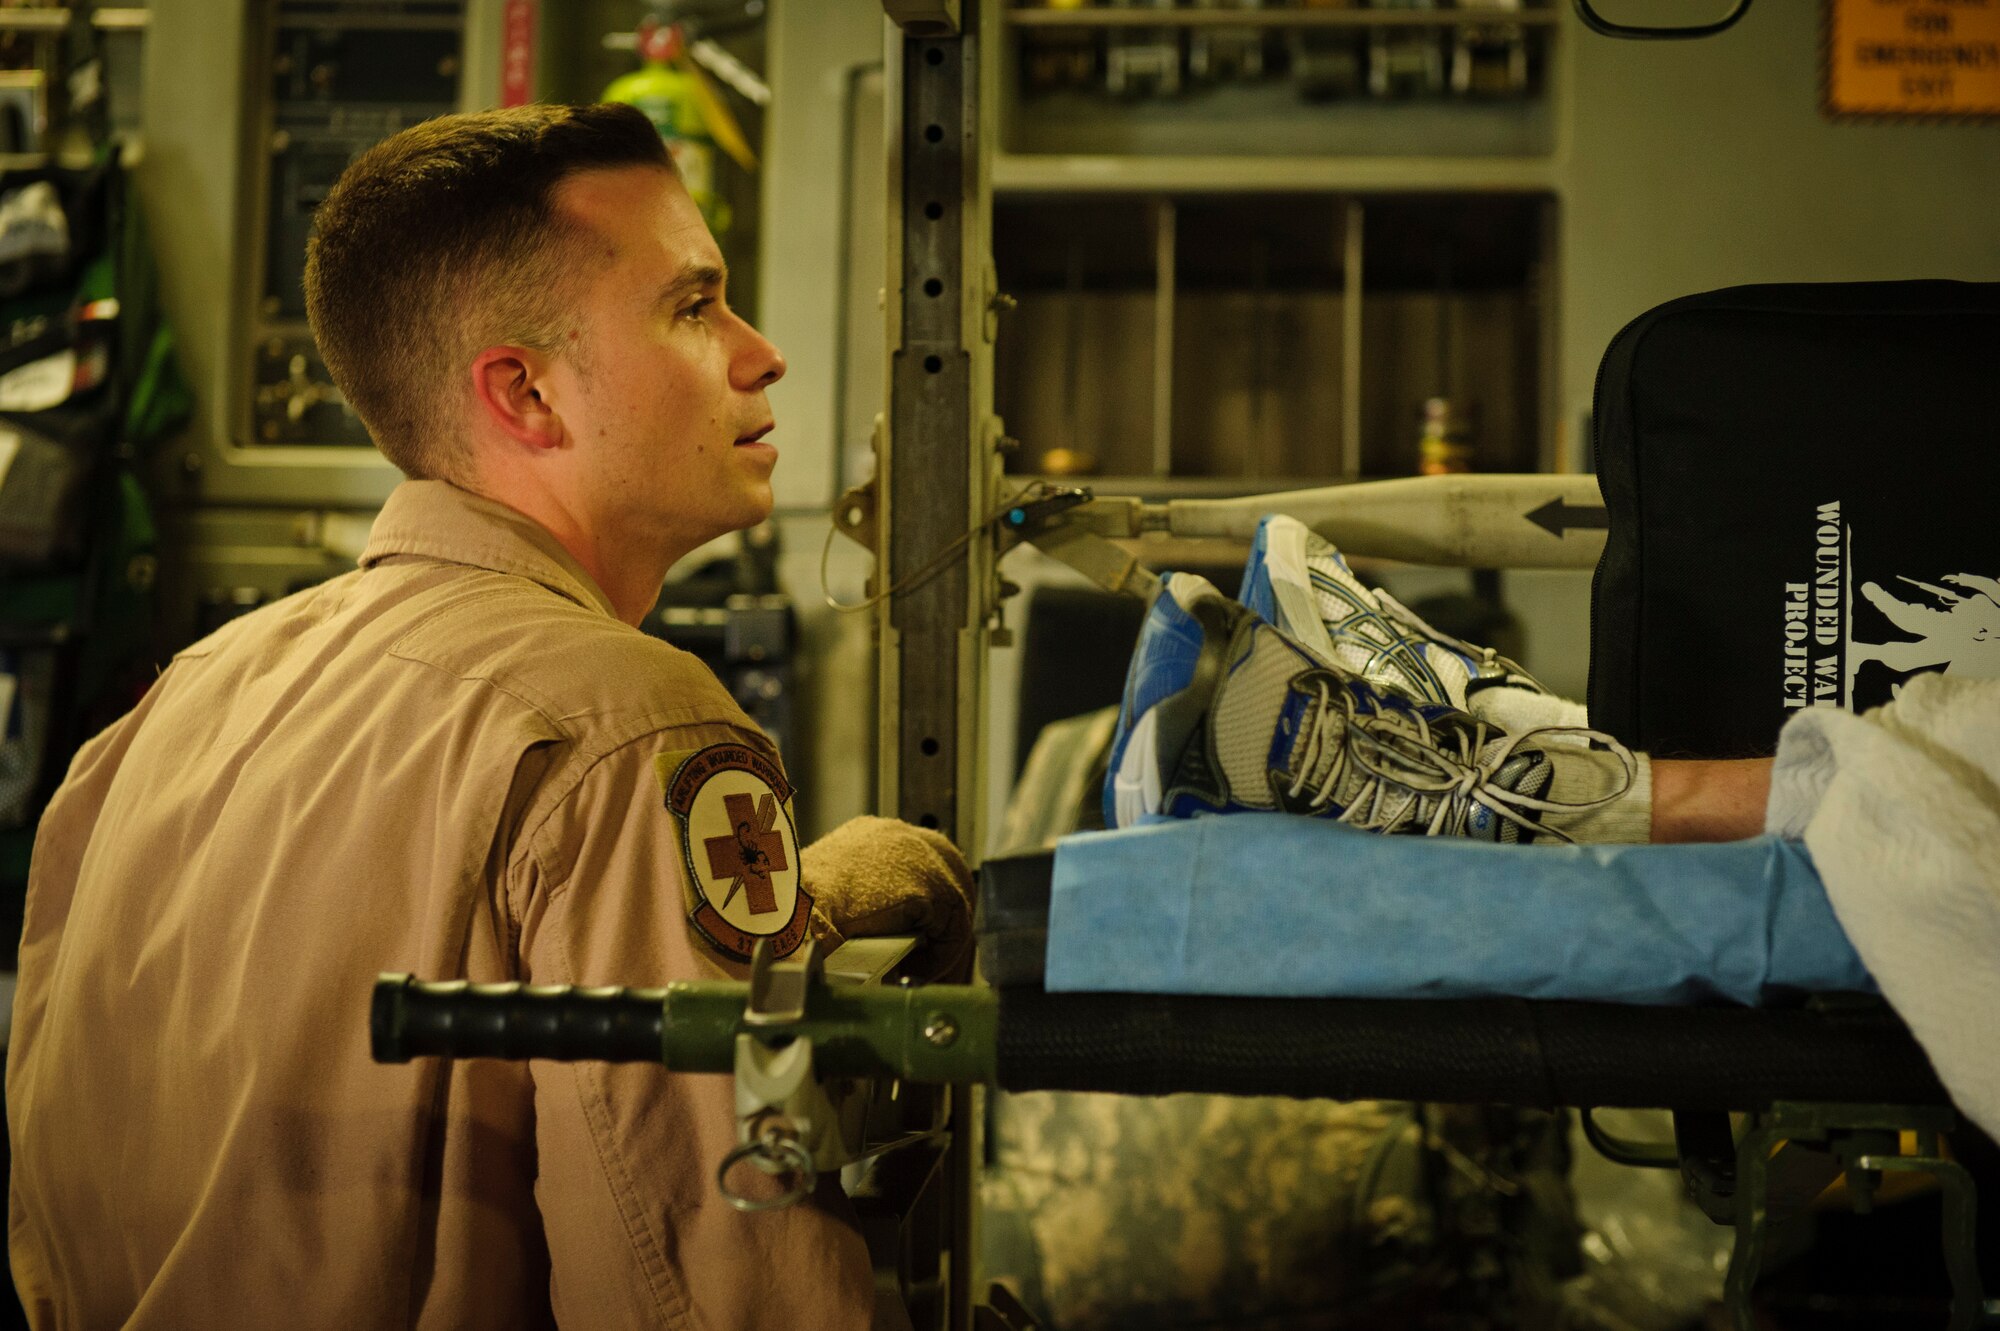 SOUTHWEST ASIA – Tech. Sgt. Travis Shore, 379th Expeditionary Aeromedical Evacuation Squadron medical technician, checks a patient’s equipment before an evacuation mission here April 25, 2012. (U.S. Air Force photo/Staff Sgt. Nathanael Callon)